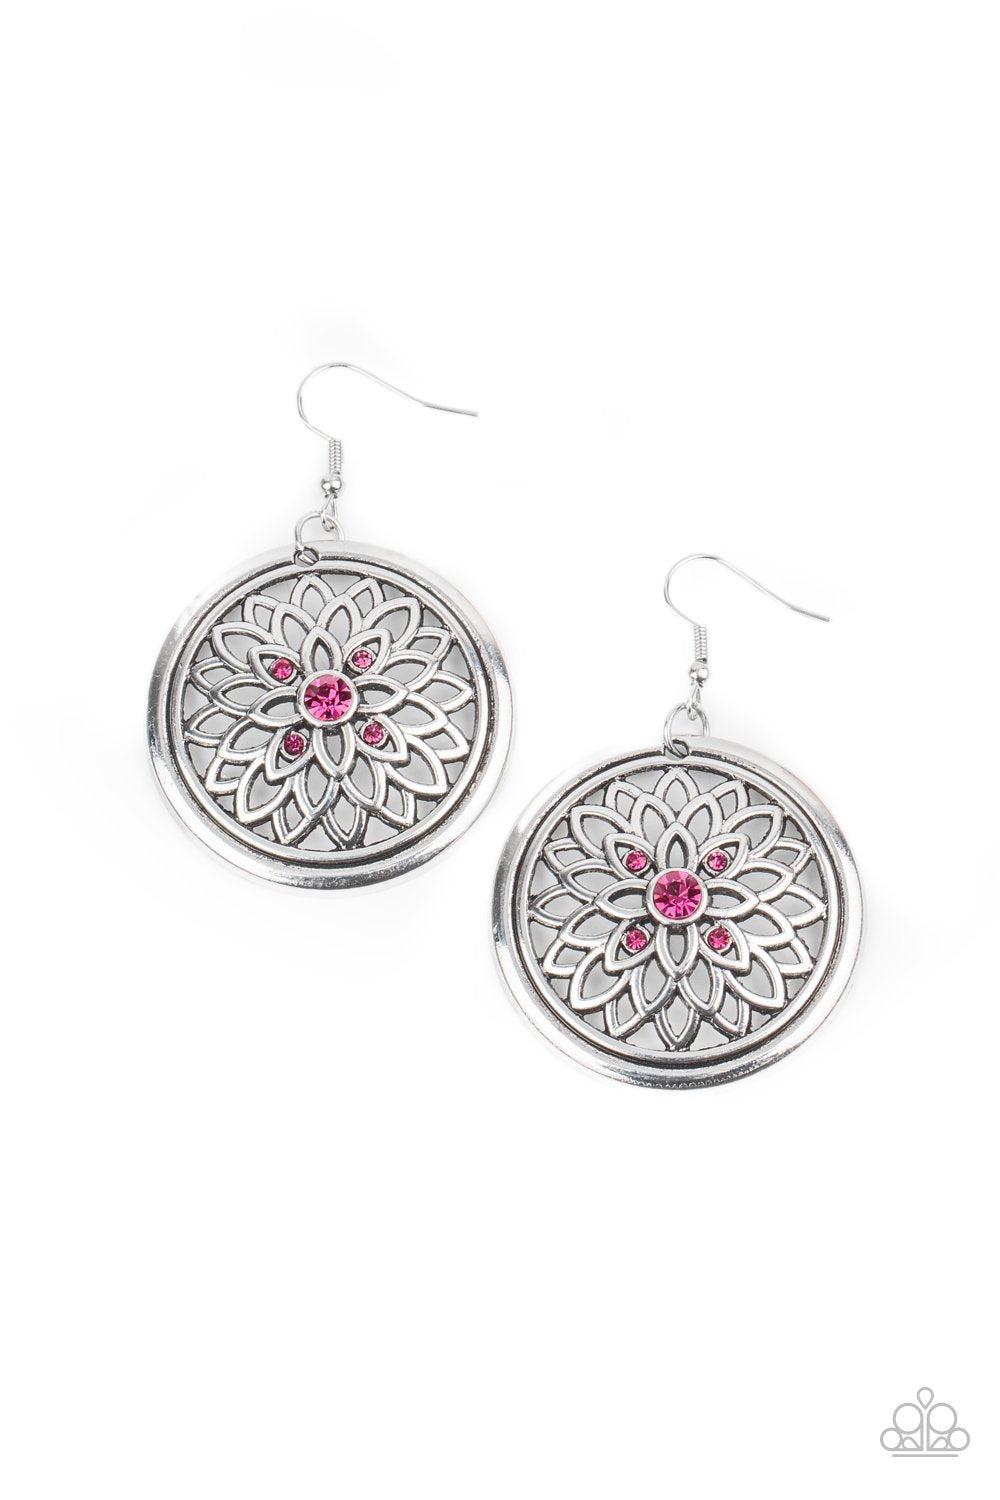 Mega Medallions Pink Rhinestone and Silver Earrings - Paparazzi Accessories- lightbox - CarasShop.com - $5 Jewelry by Cara Jewels